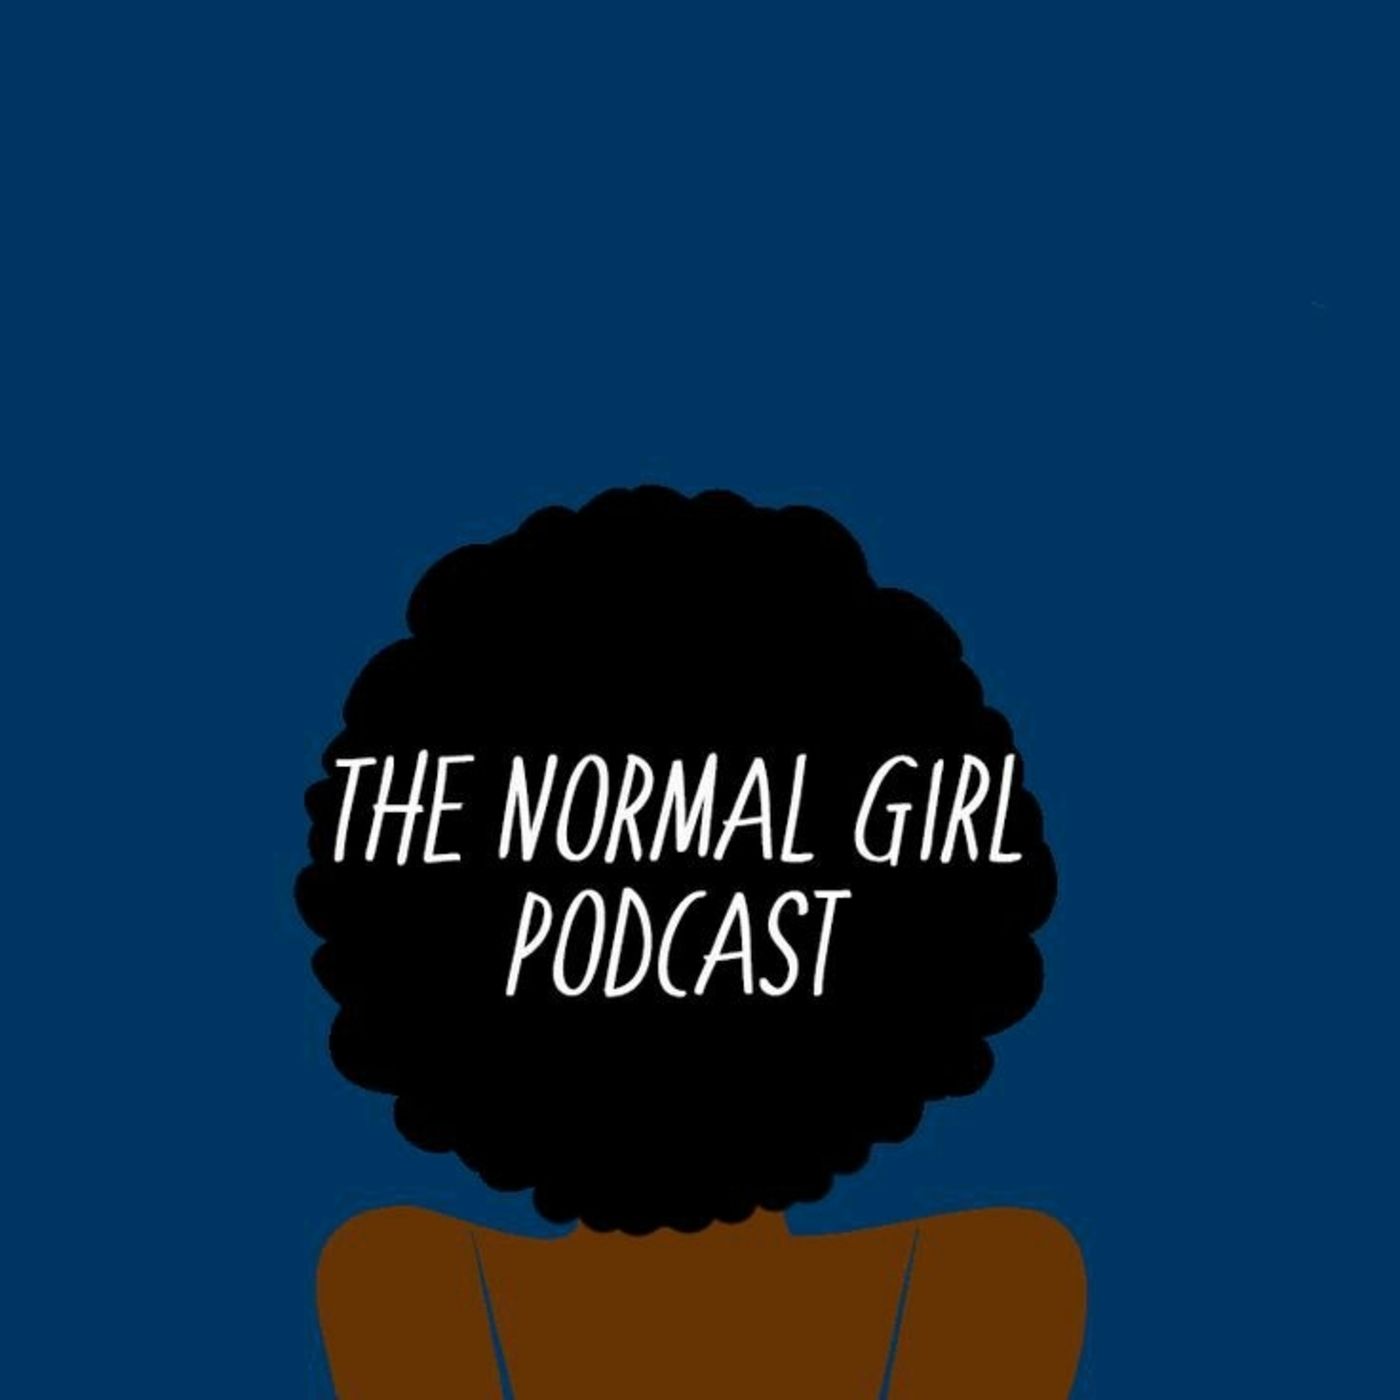 The Normal Girl Podcast